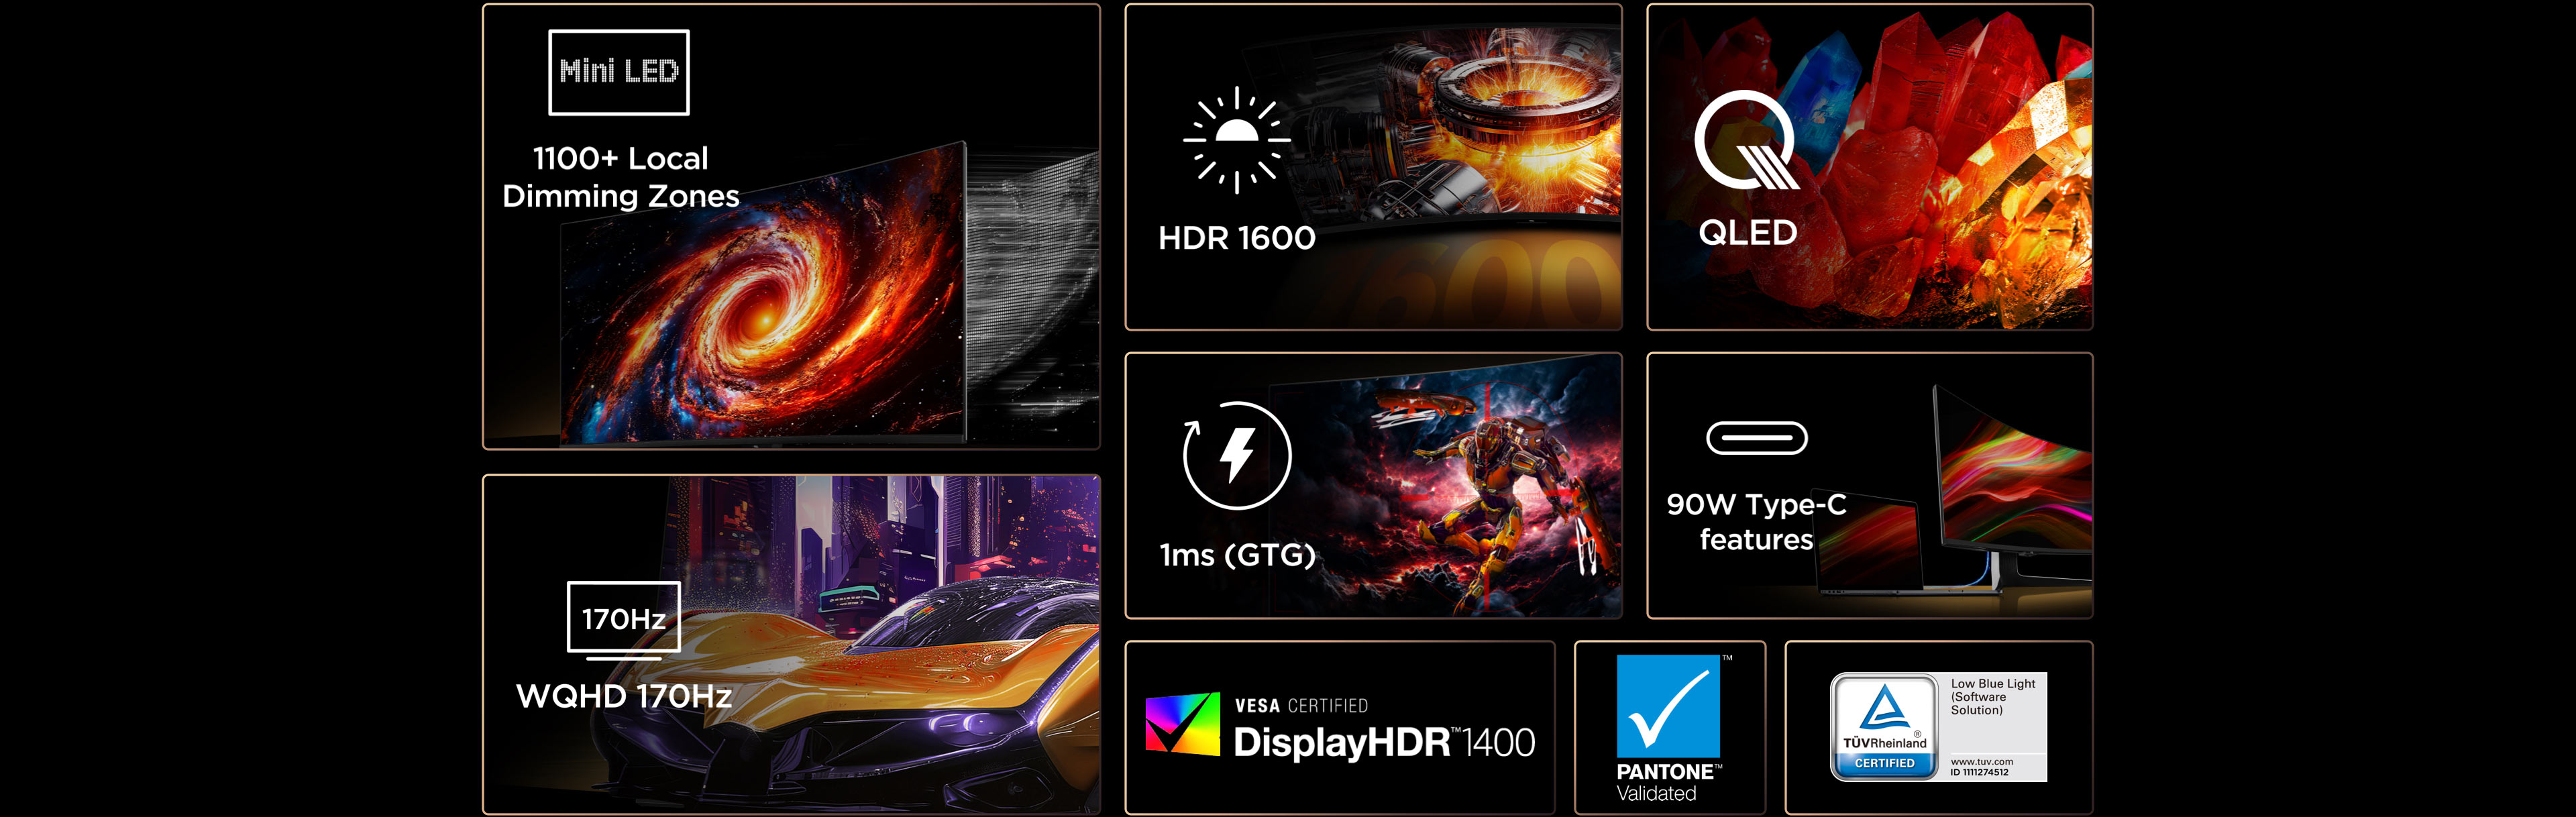 TCL 34R83Q HDR Professional Monitor Features